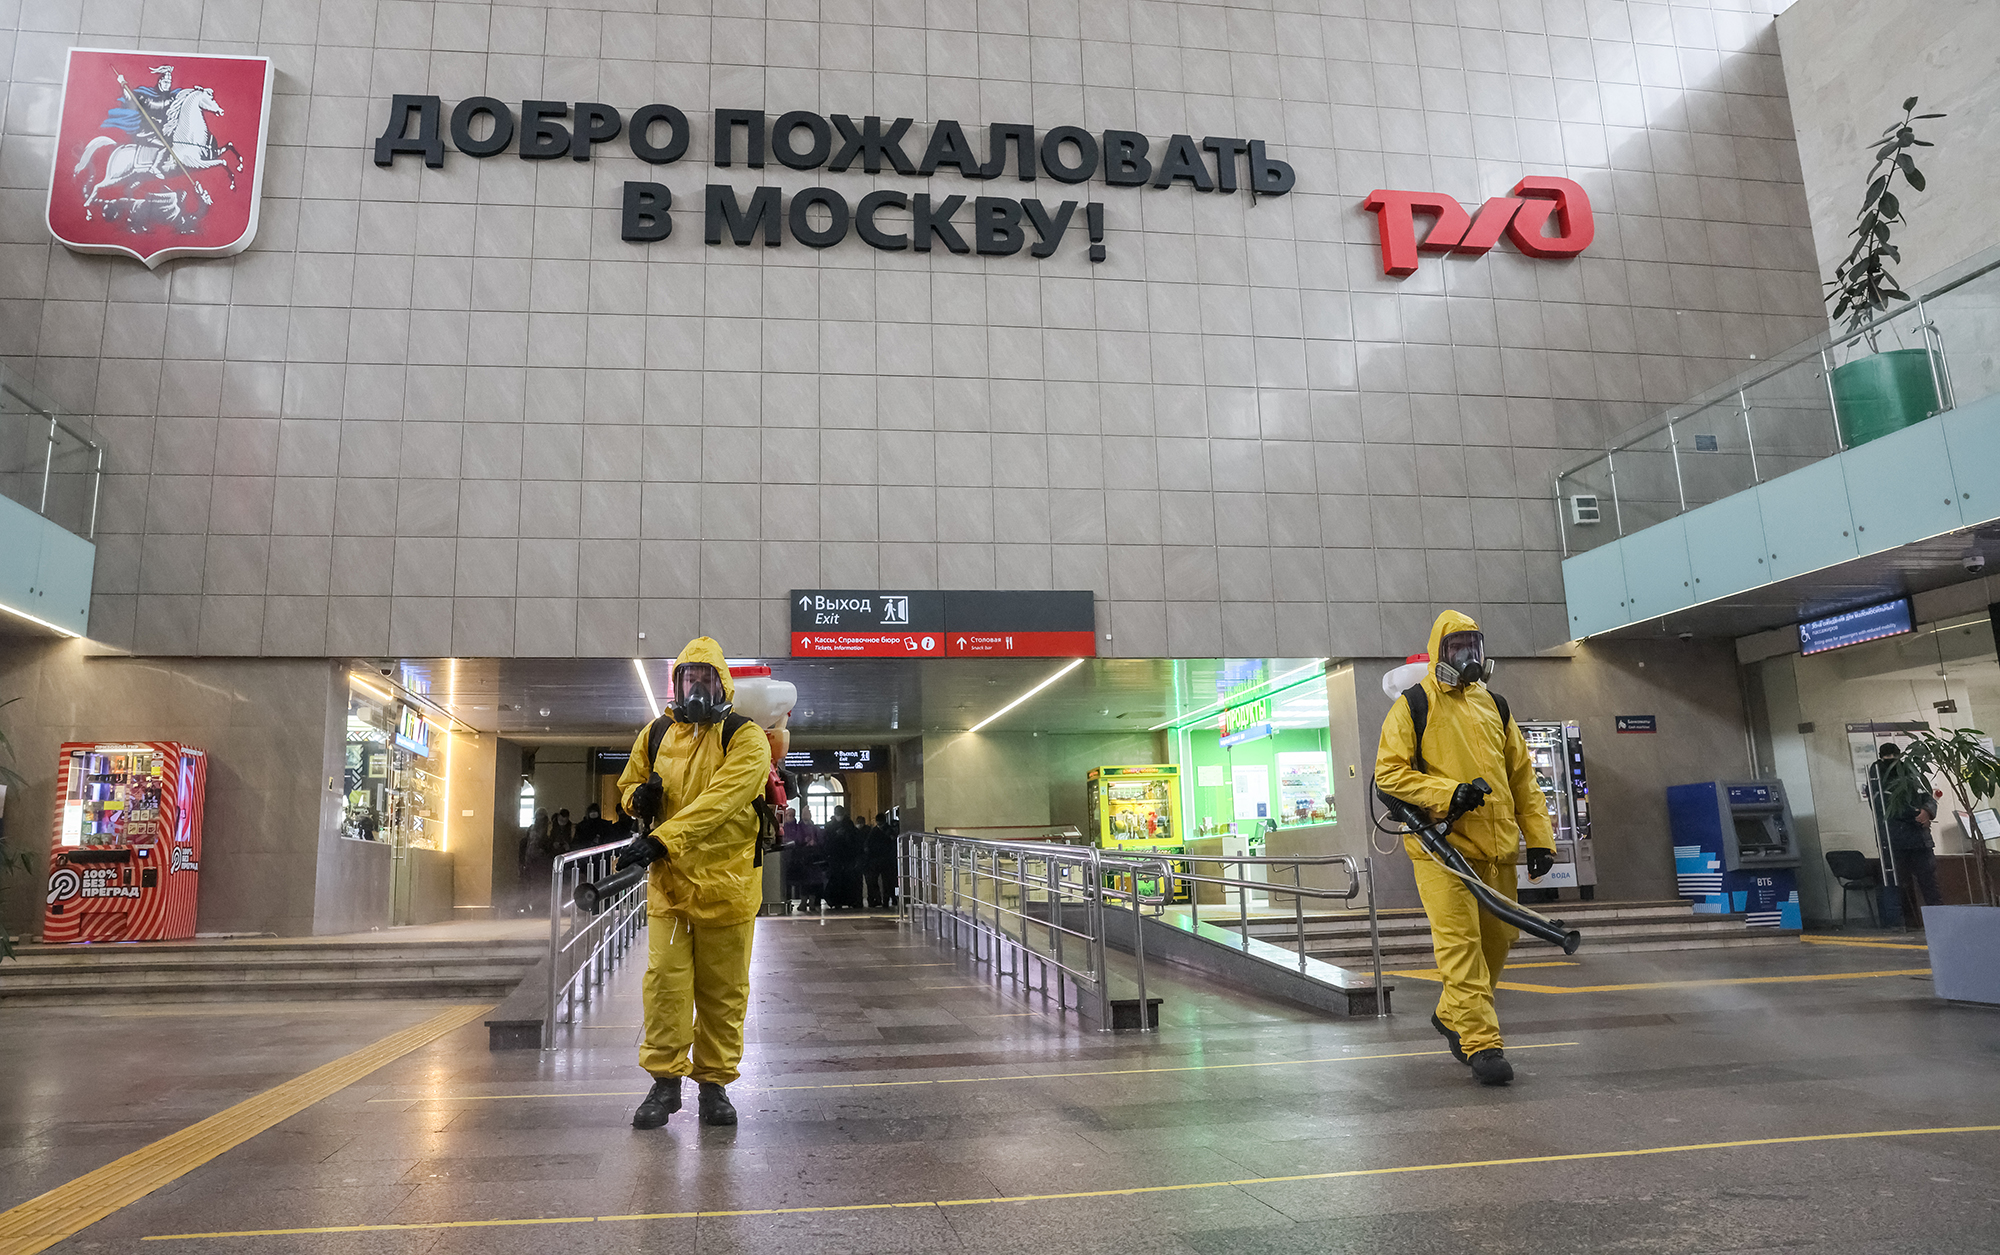 Employees of the Lider Center for Special Risk Rescue Operations of the Russian Emergencies Ministry carry out disinfection of Leningradsky Railway Station in Moscow, Russia amid the COVID-19 pandemic on January 27.